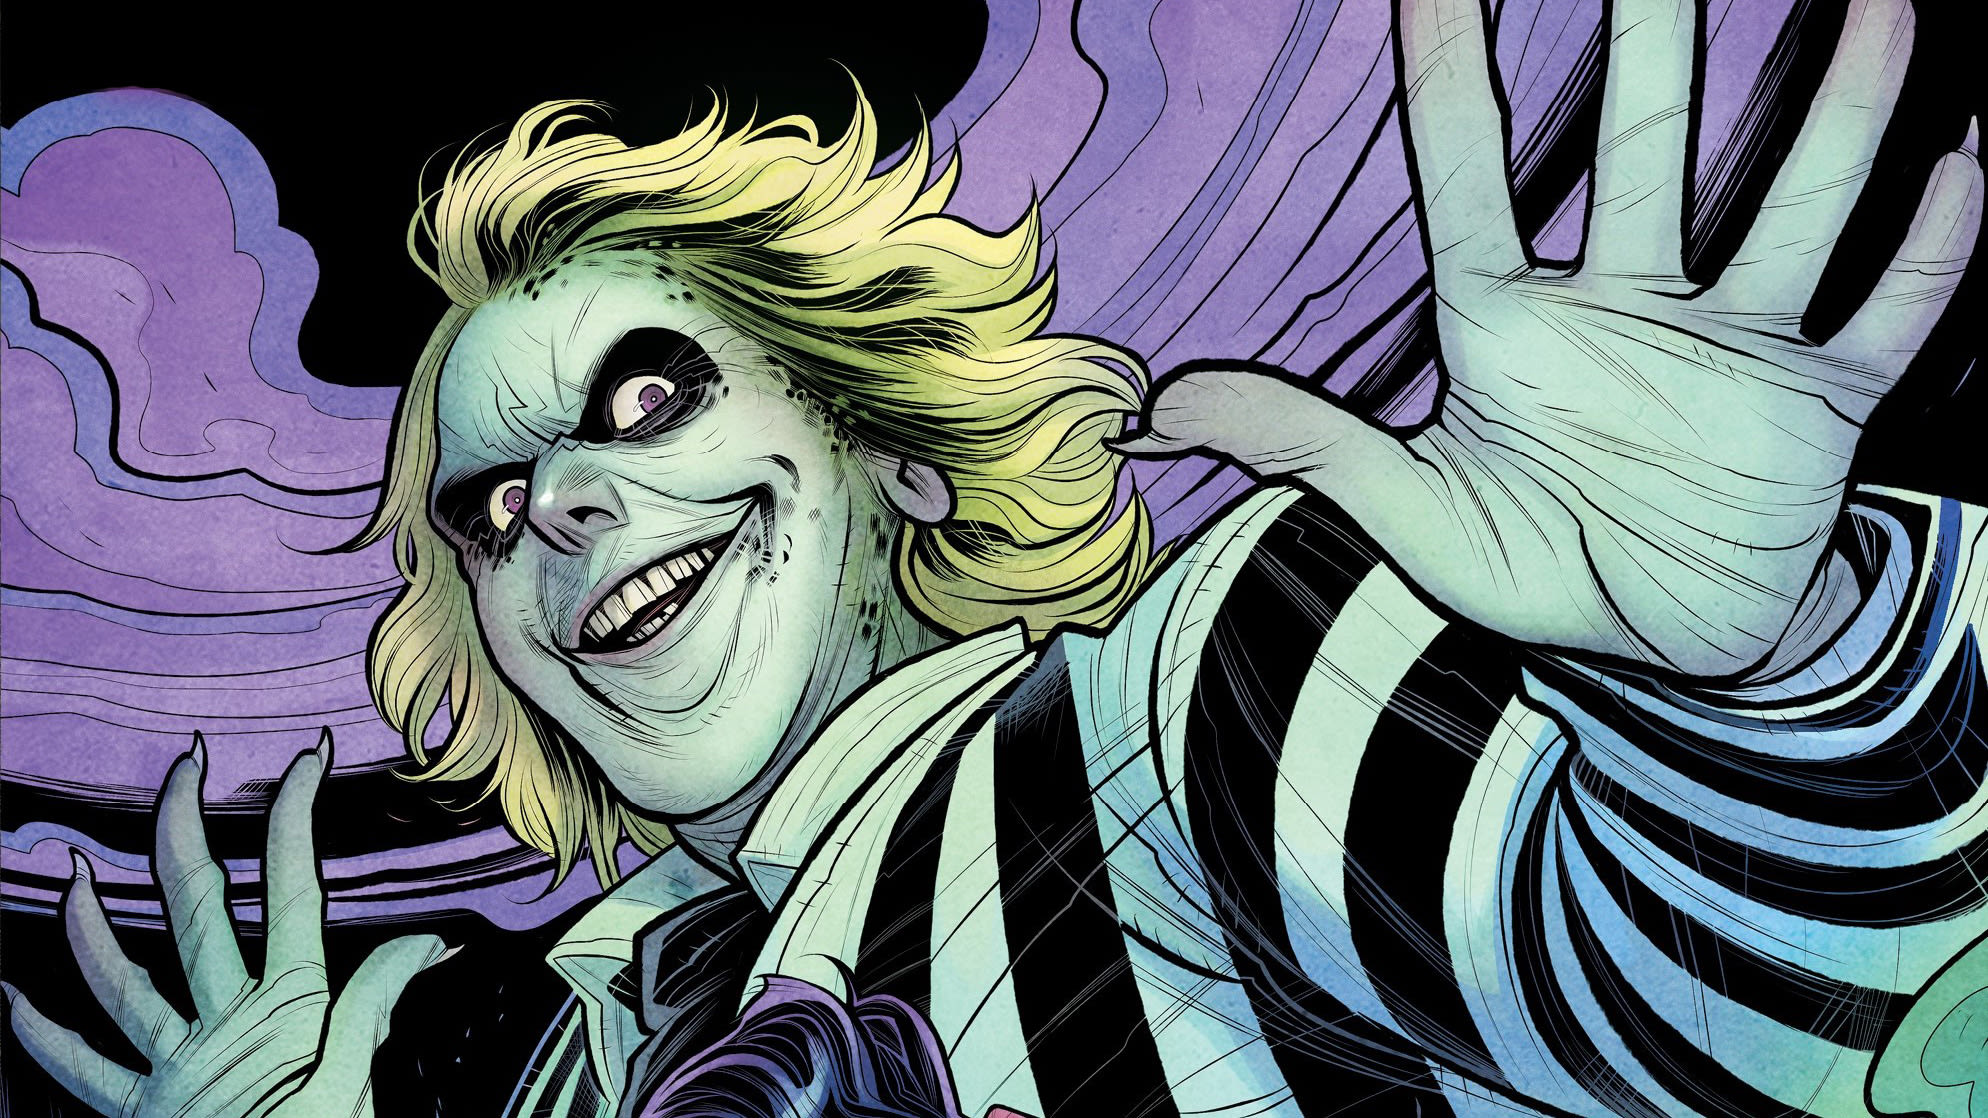 Michael Keaton's Batman faces Michael Keaton's Beetlejuice in a new series of tie-in covers from DC